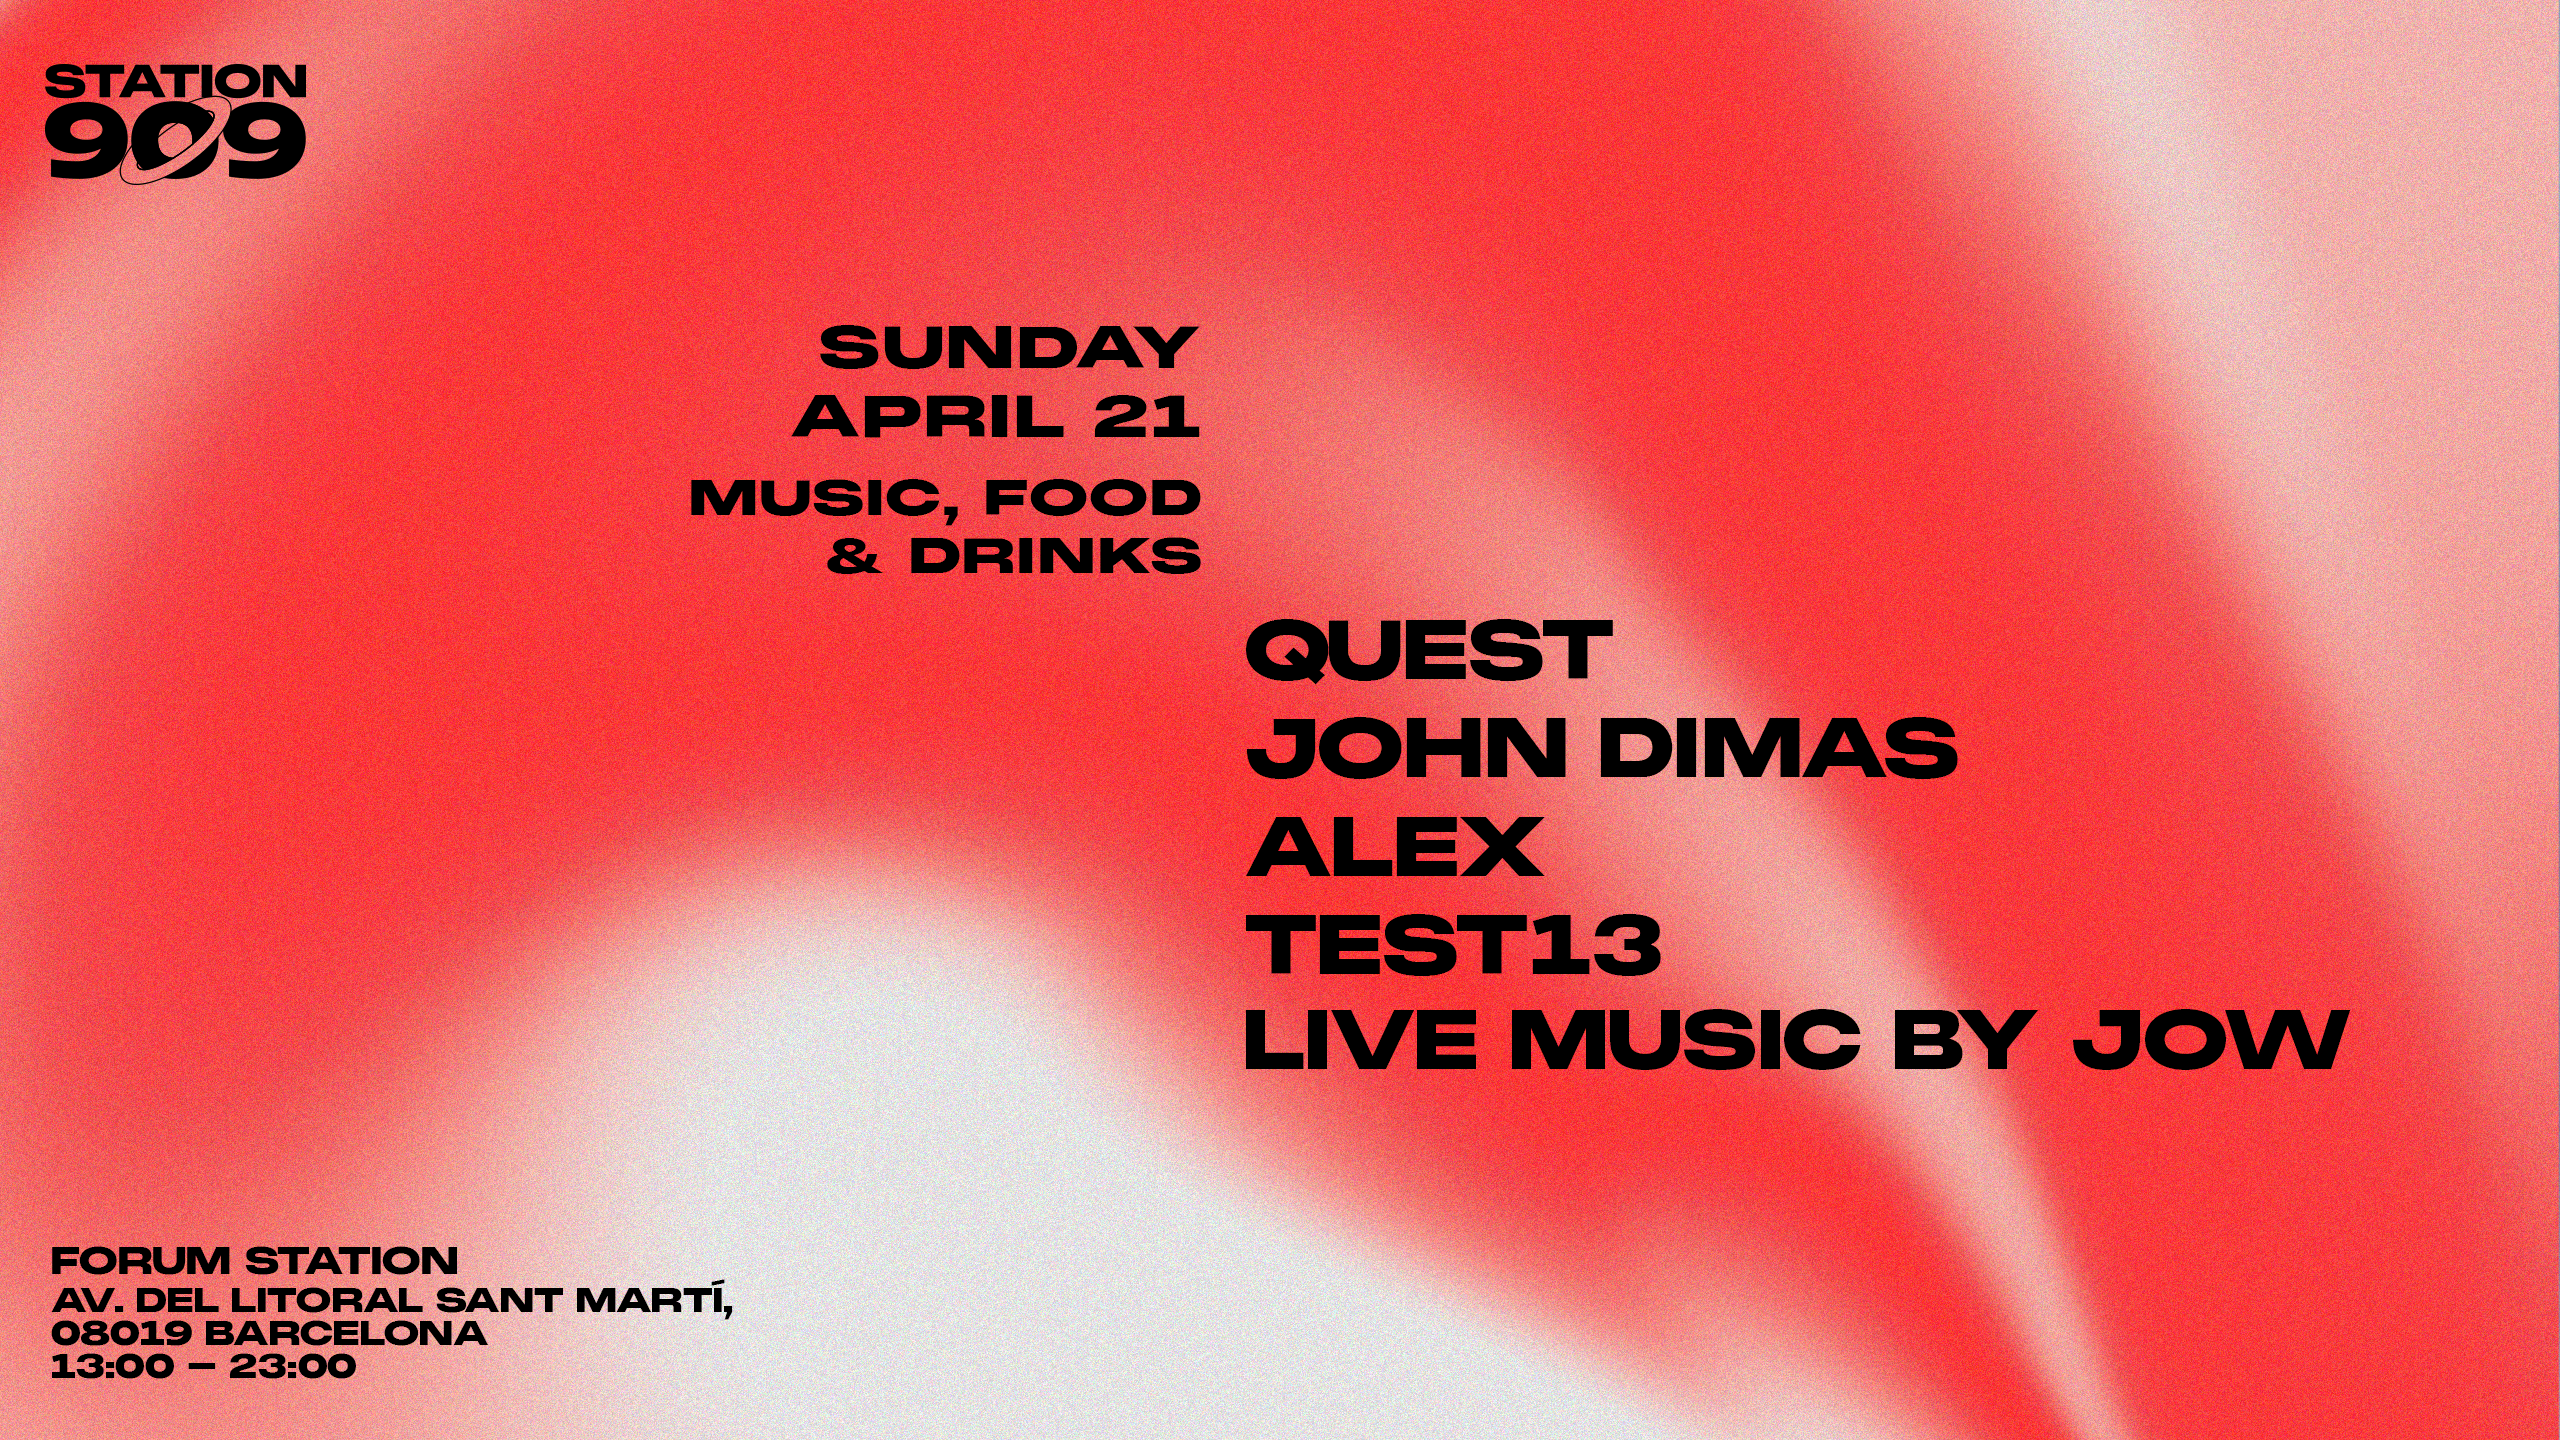 Open Air + Market, Food & Drink at Station 909 with Quest, John Dimas - Página frontal